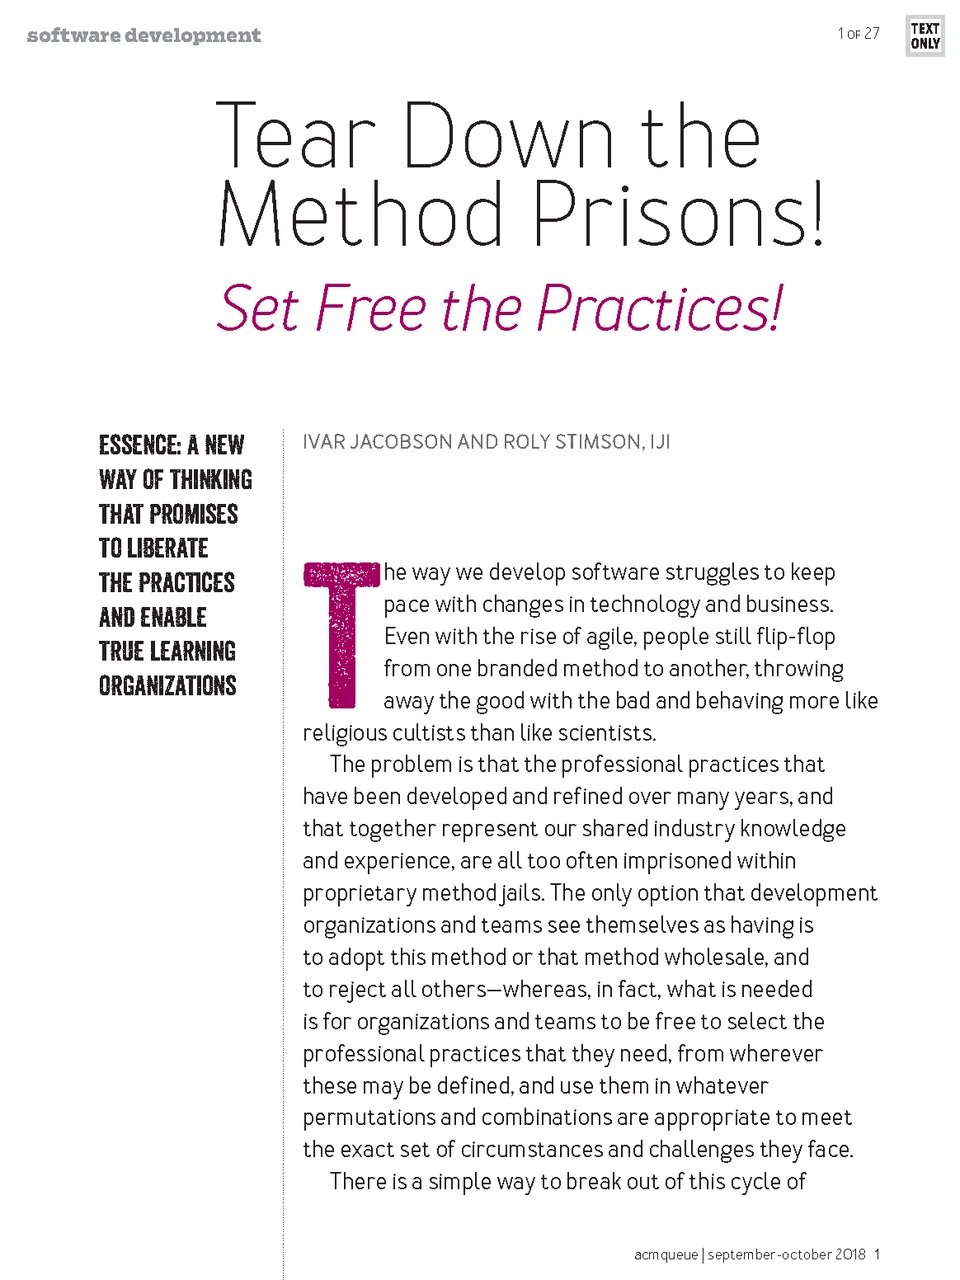 Agile Methods? Tear Down the Method Prisons! Set Free the Practices!